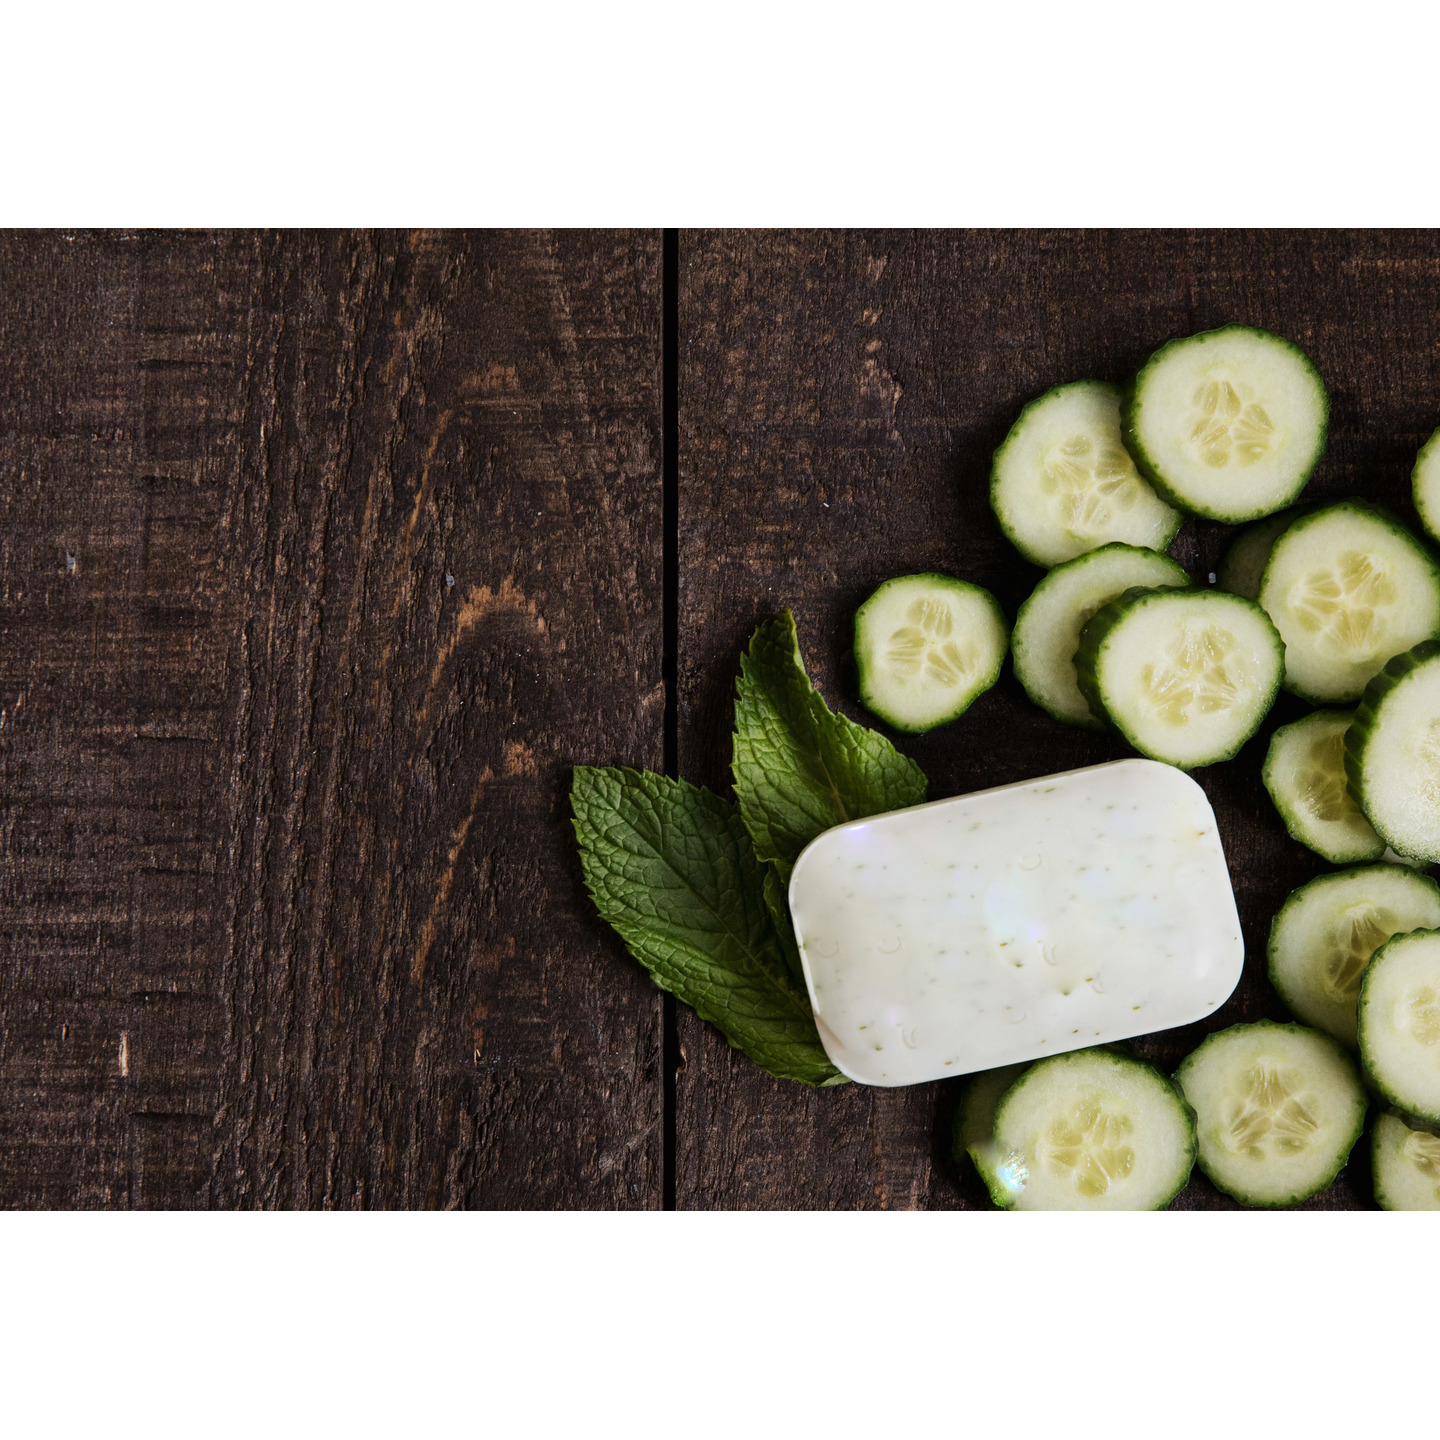 Cucumber soap - refreshing and cooling